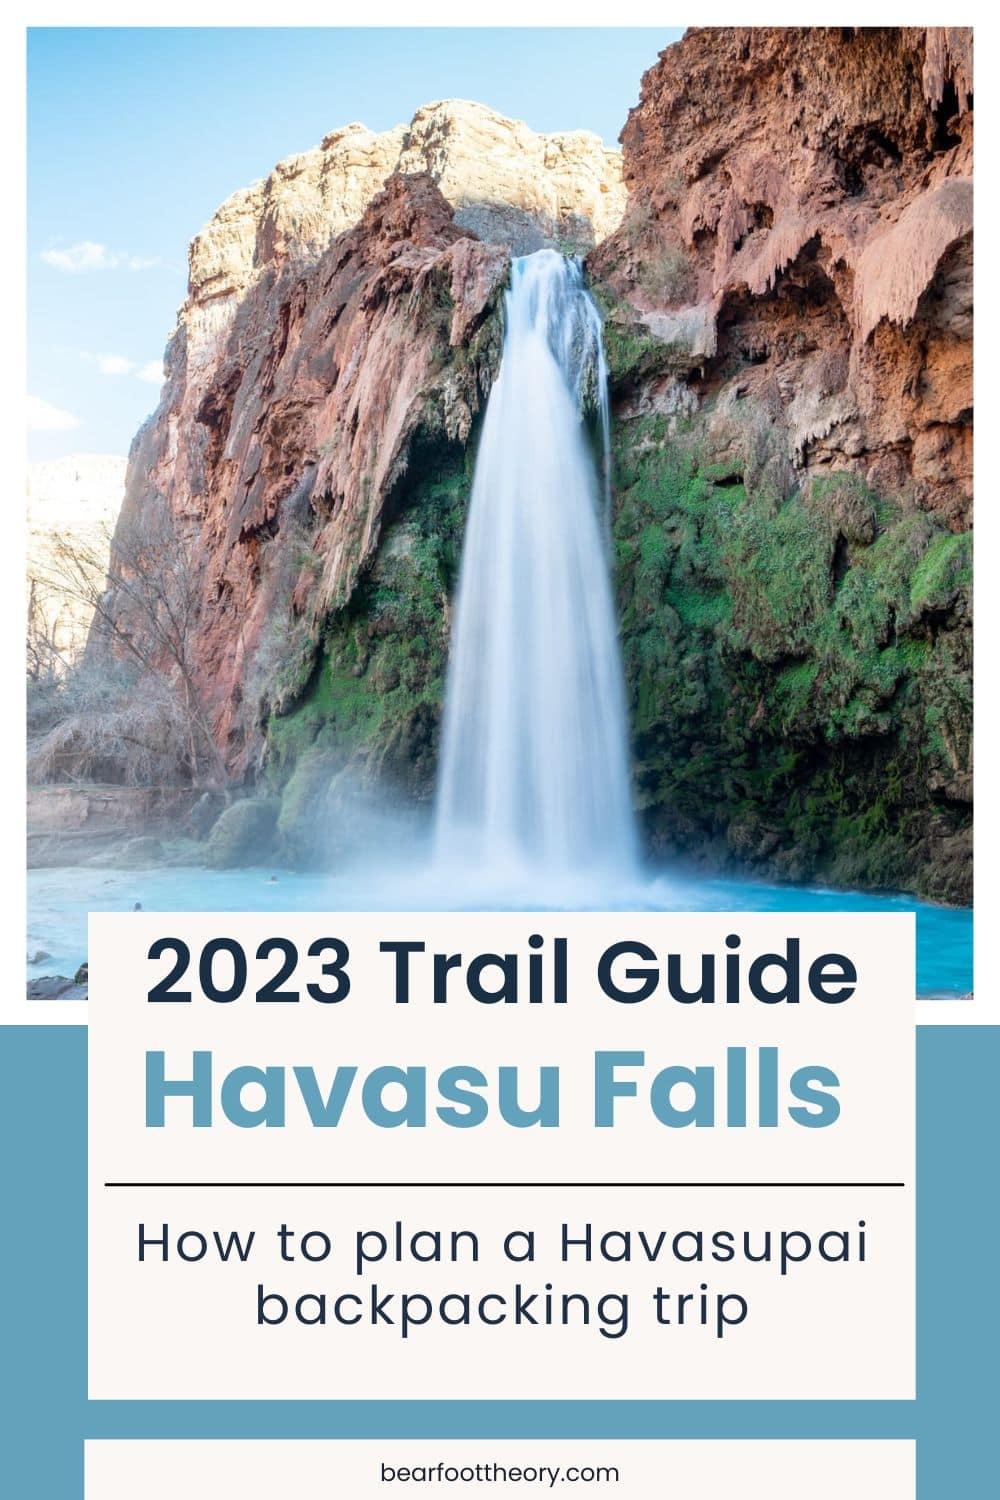 Learn everything you need to know about backpacking to Havasupai Falls (otherwise known as Havasu Falls). This trail guide has details on the permit process, the campground, how to hike to all 5 amazing waterfalls, and what gear to pack for this incredible adventure.